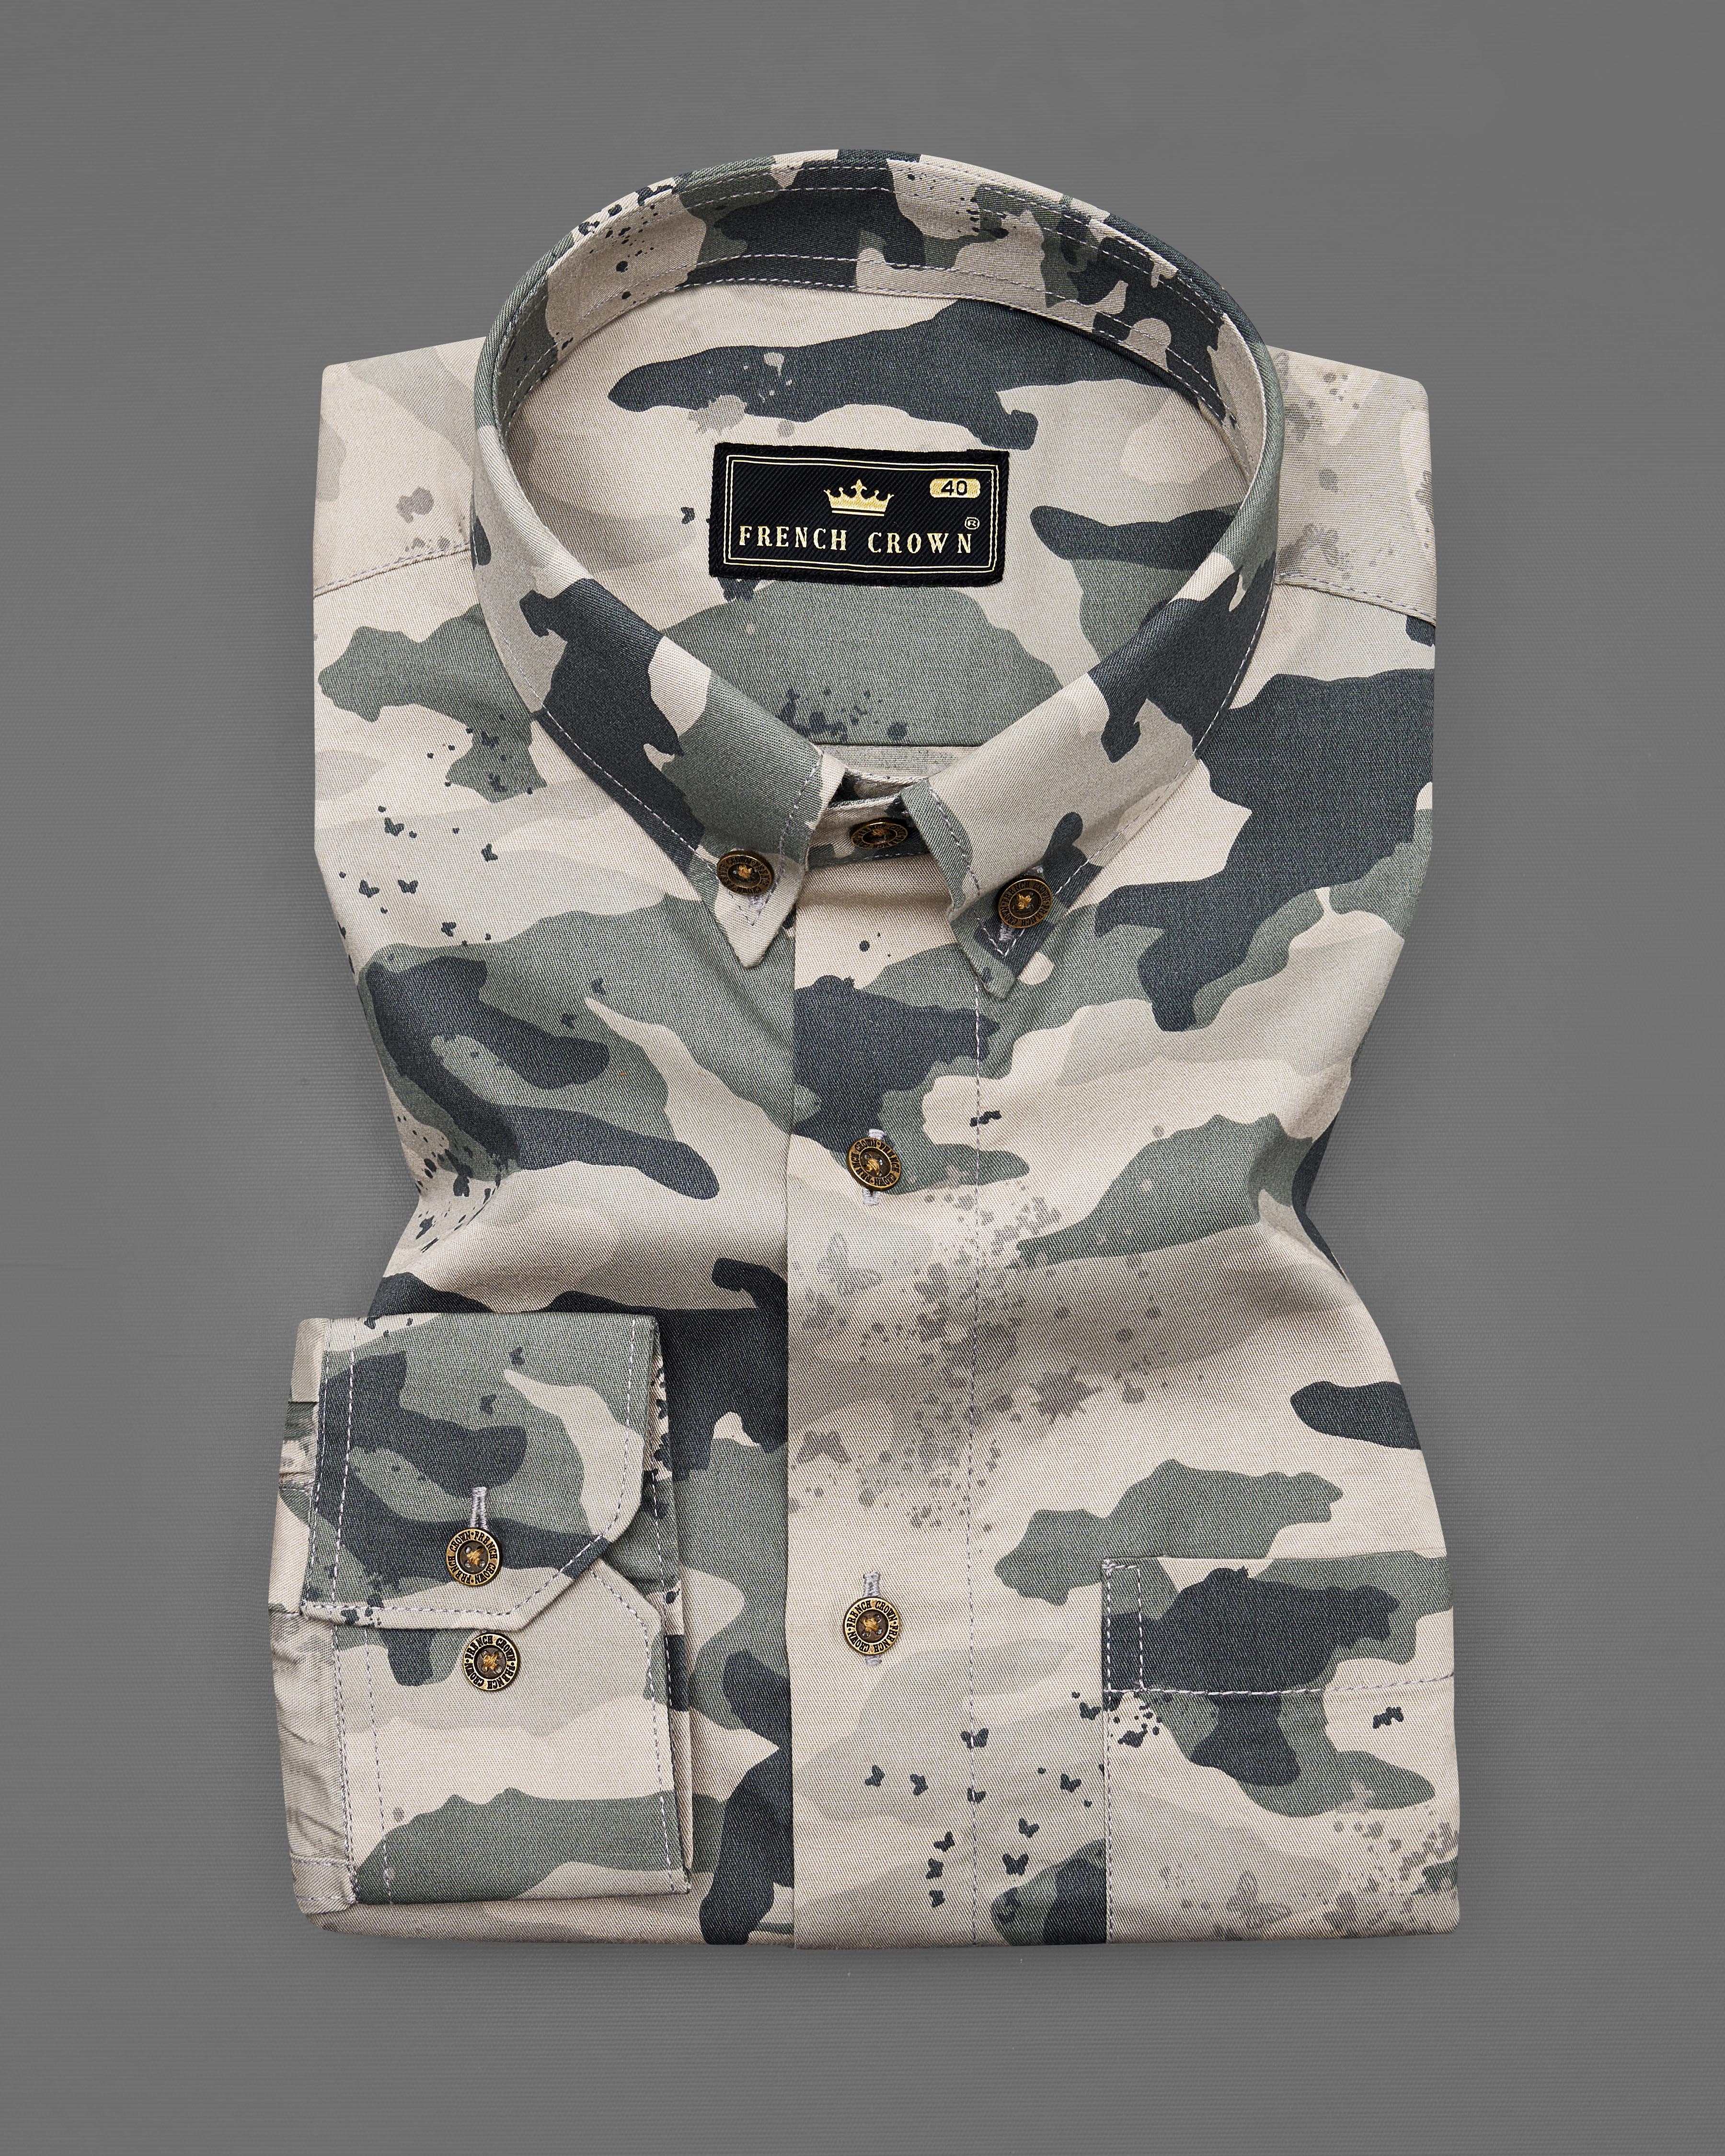 Swirl Brown with Baltic Gray Camouflage Printed Royal Oxford Shirt 8910-BD-MB-38, 8910-BD-MB-H-38,  8910-BD-MB-39,  8910-BD-MB-H-39,  8910-BD-MB-40,  8910-BD-MB-H-40,  8910-BD-MB-42,  8910-BD-MB-H-42,  8910-BD-MB-44,  8910-BD-MB-H-44,  8910-BD-MB-46,  8910-BD-MB-H-46,  8910-BD-MB-48,  8910-BD-MB-H-48,  8910-BD-MB-50,  8910-BD-MB-H-50,  8910-BD-MB-52,  8910-BD-MB-H-52